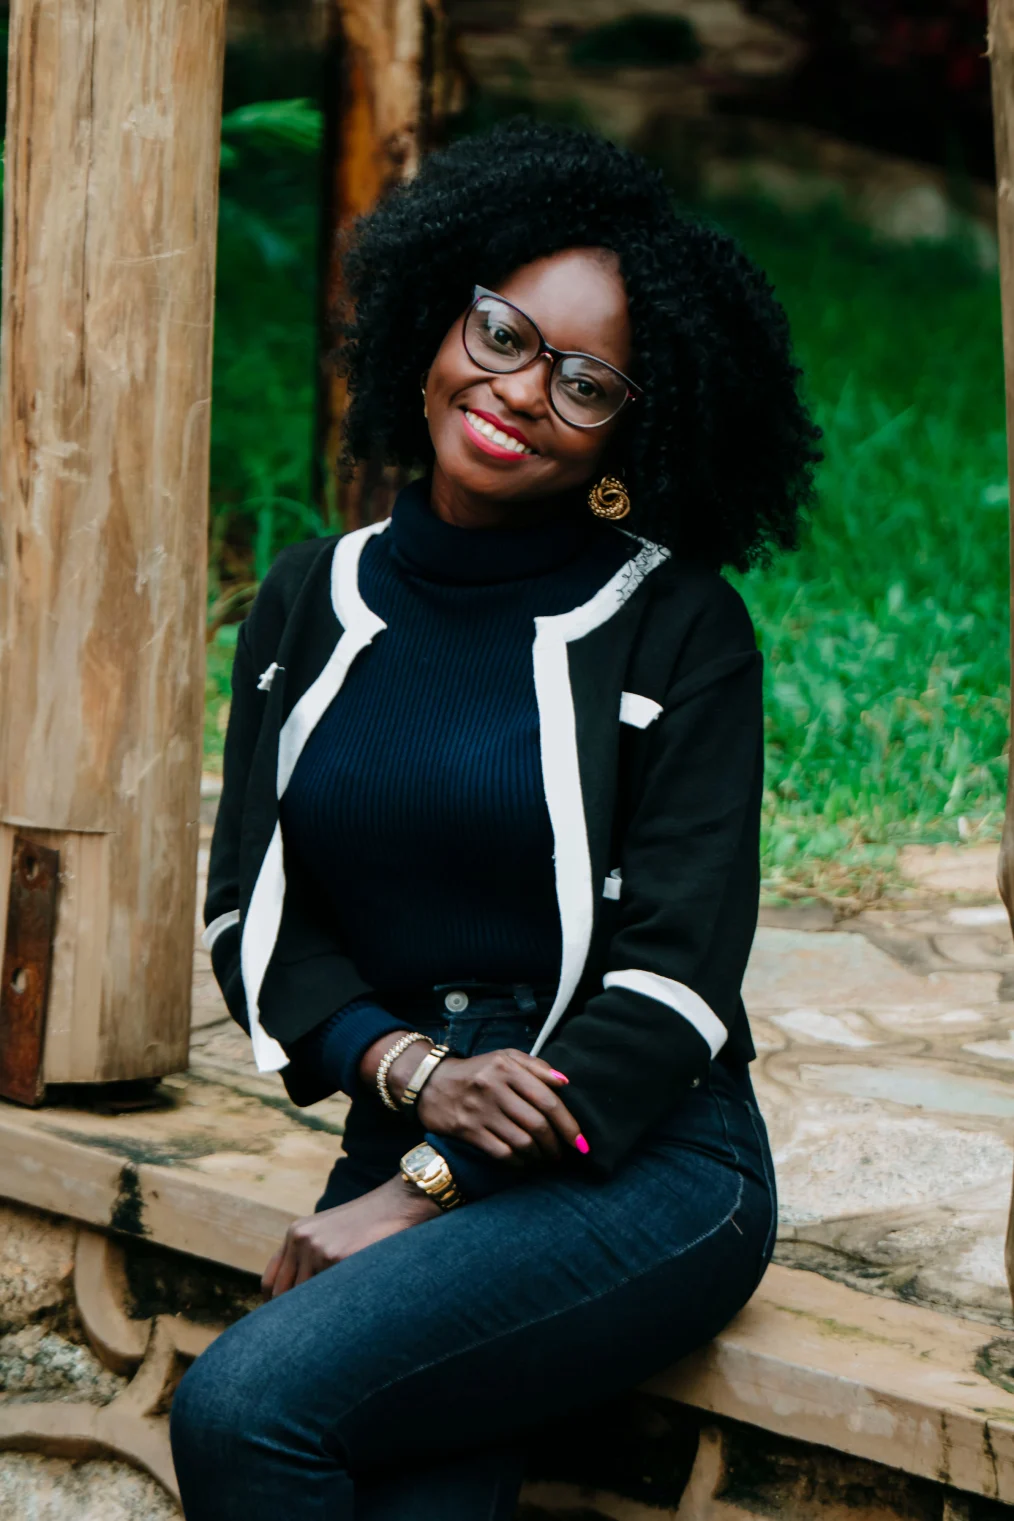 A Black woman with a deep skin tone sits on a wooden step outdoors. She has curly black hair and is wearing glasses as she smiles at the camera. The woman is wearing a black sweater with white lining, a black turtleneck, and denim jeans. Her fingernails are painted bright pink and on her left wrist is a watch and on her right wrist are two gold bracelets.